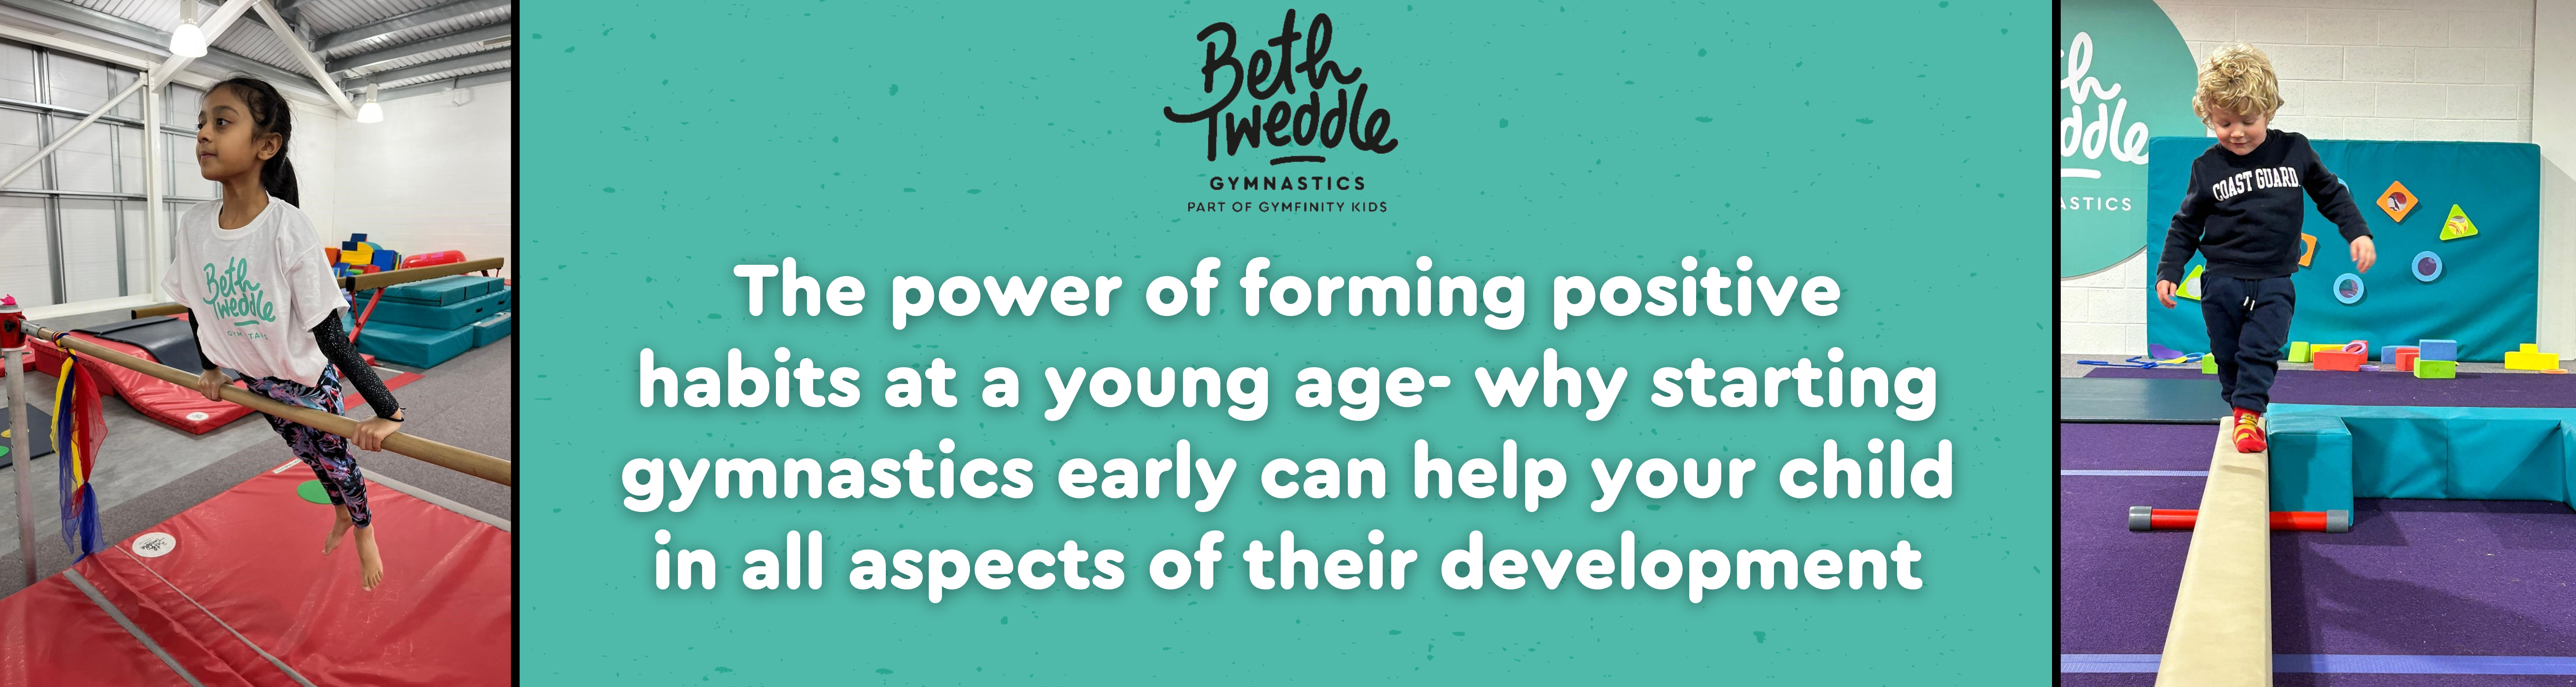 The power of forming positive habits at a young age- why starting gymnastics early can help your child in all aspects of their development